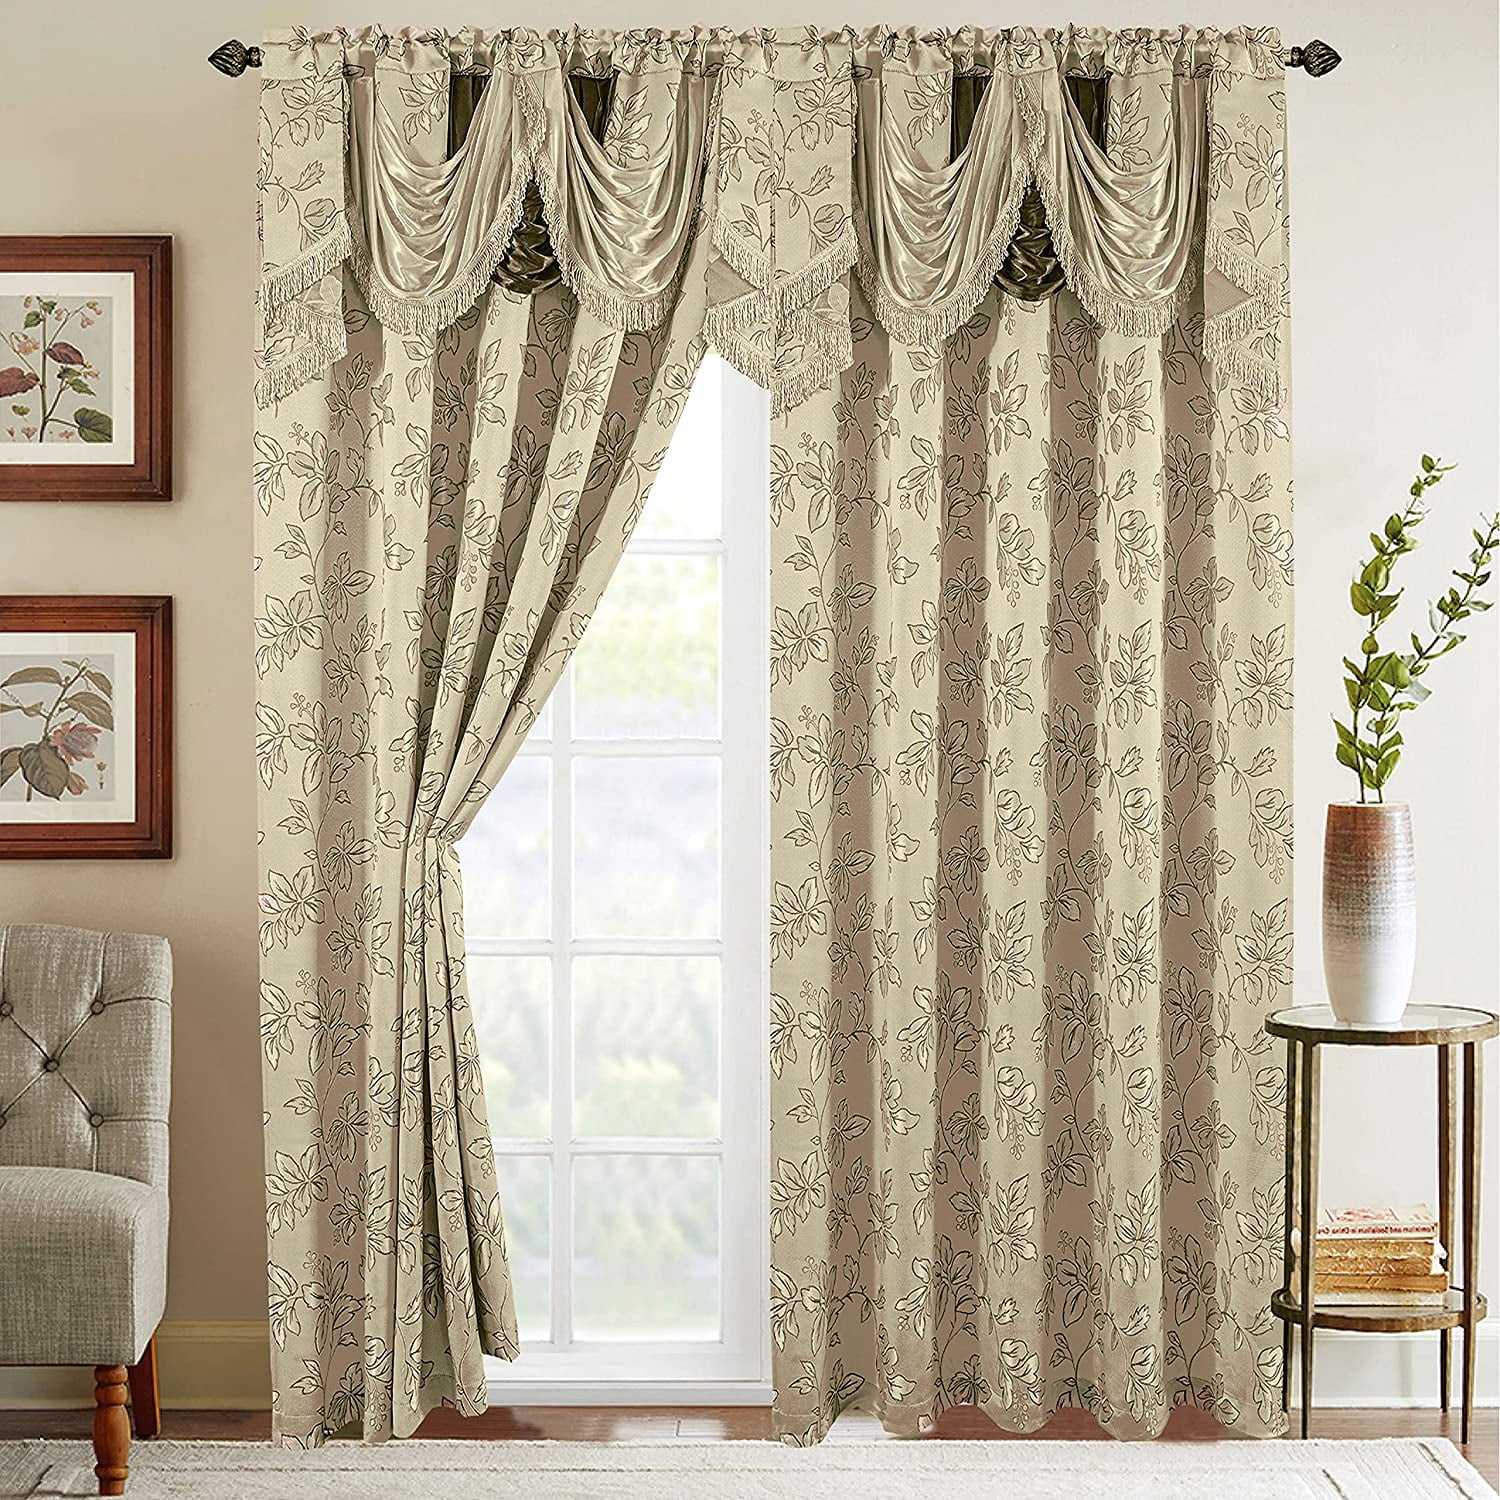 Curtain Window Panels With Attached Fancy Valance, (Set Of, 48% picture pic picture